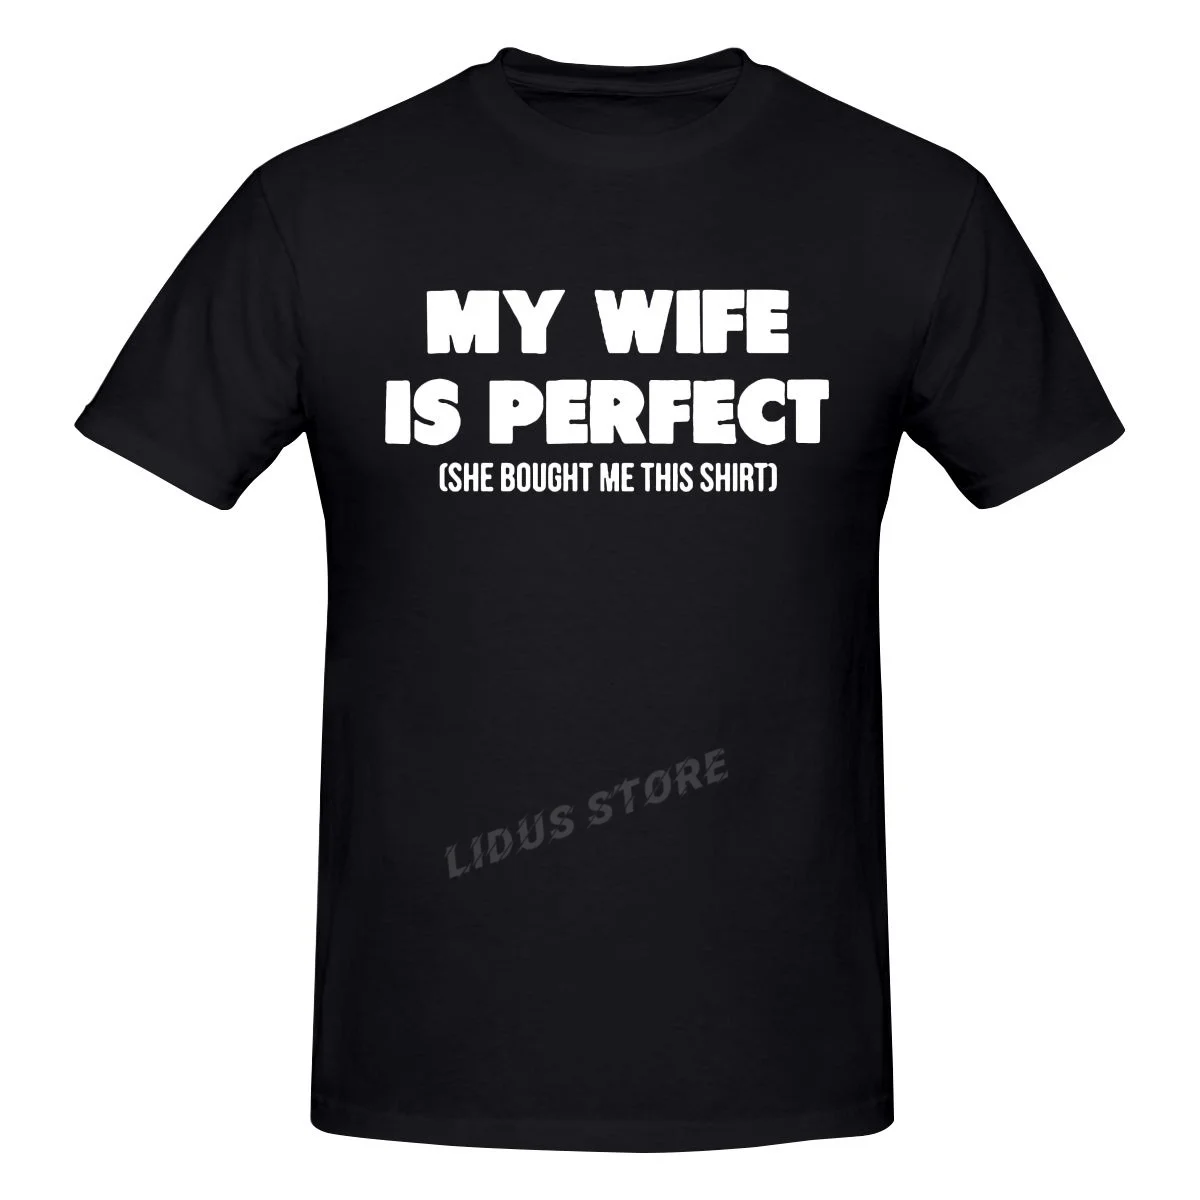 

My Wife Is Perfect She Bought Me This T-Shirt Mens Summer Style TShirt Fashion Short Sleeves Streetwear T Shirt Clothing